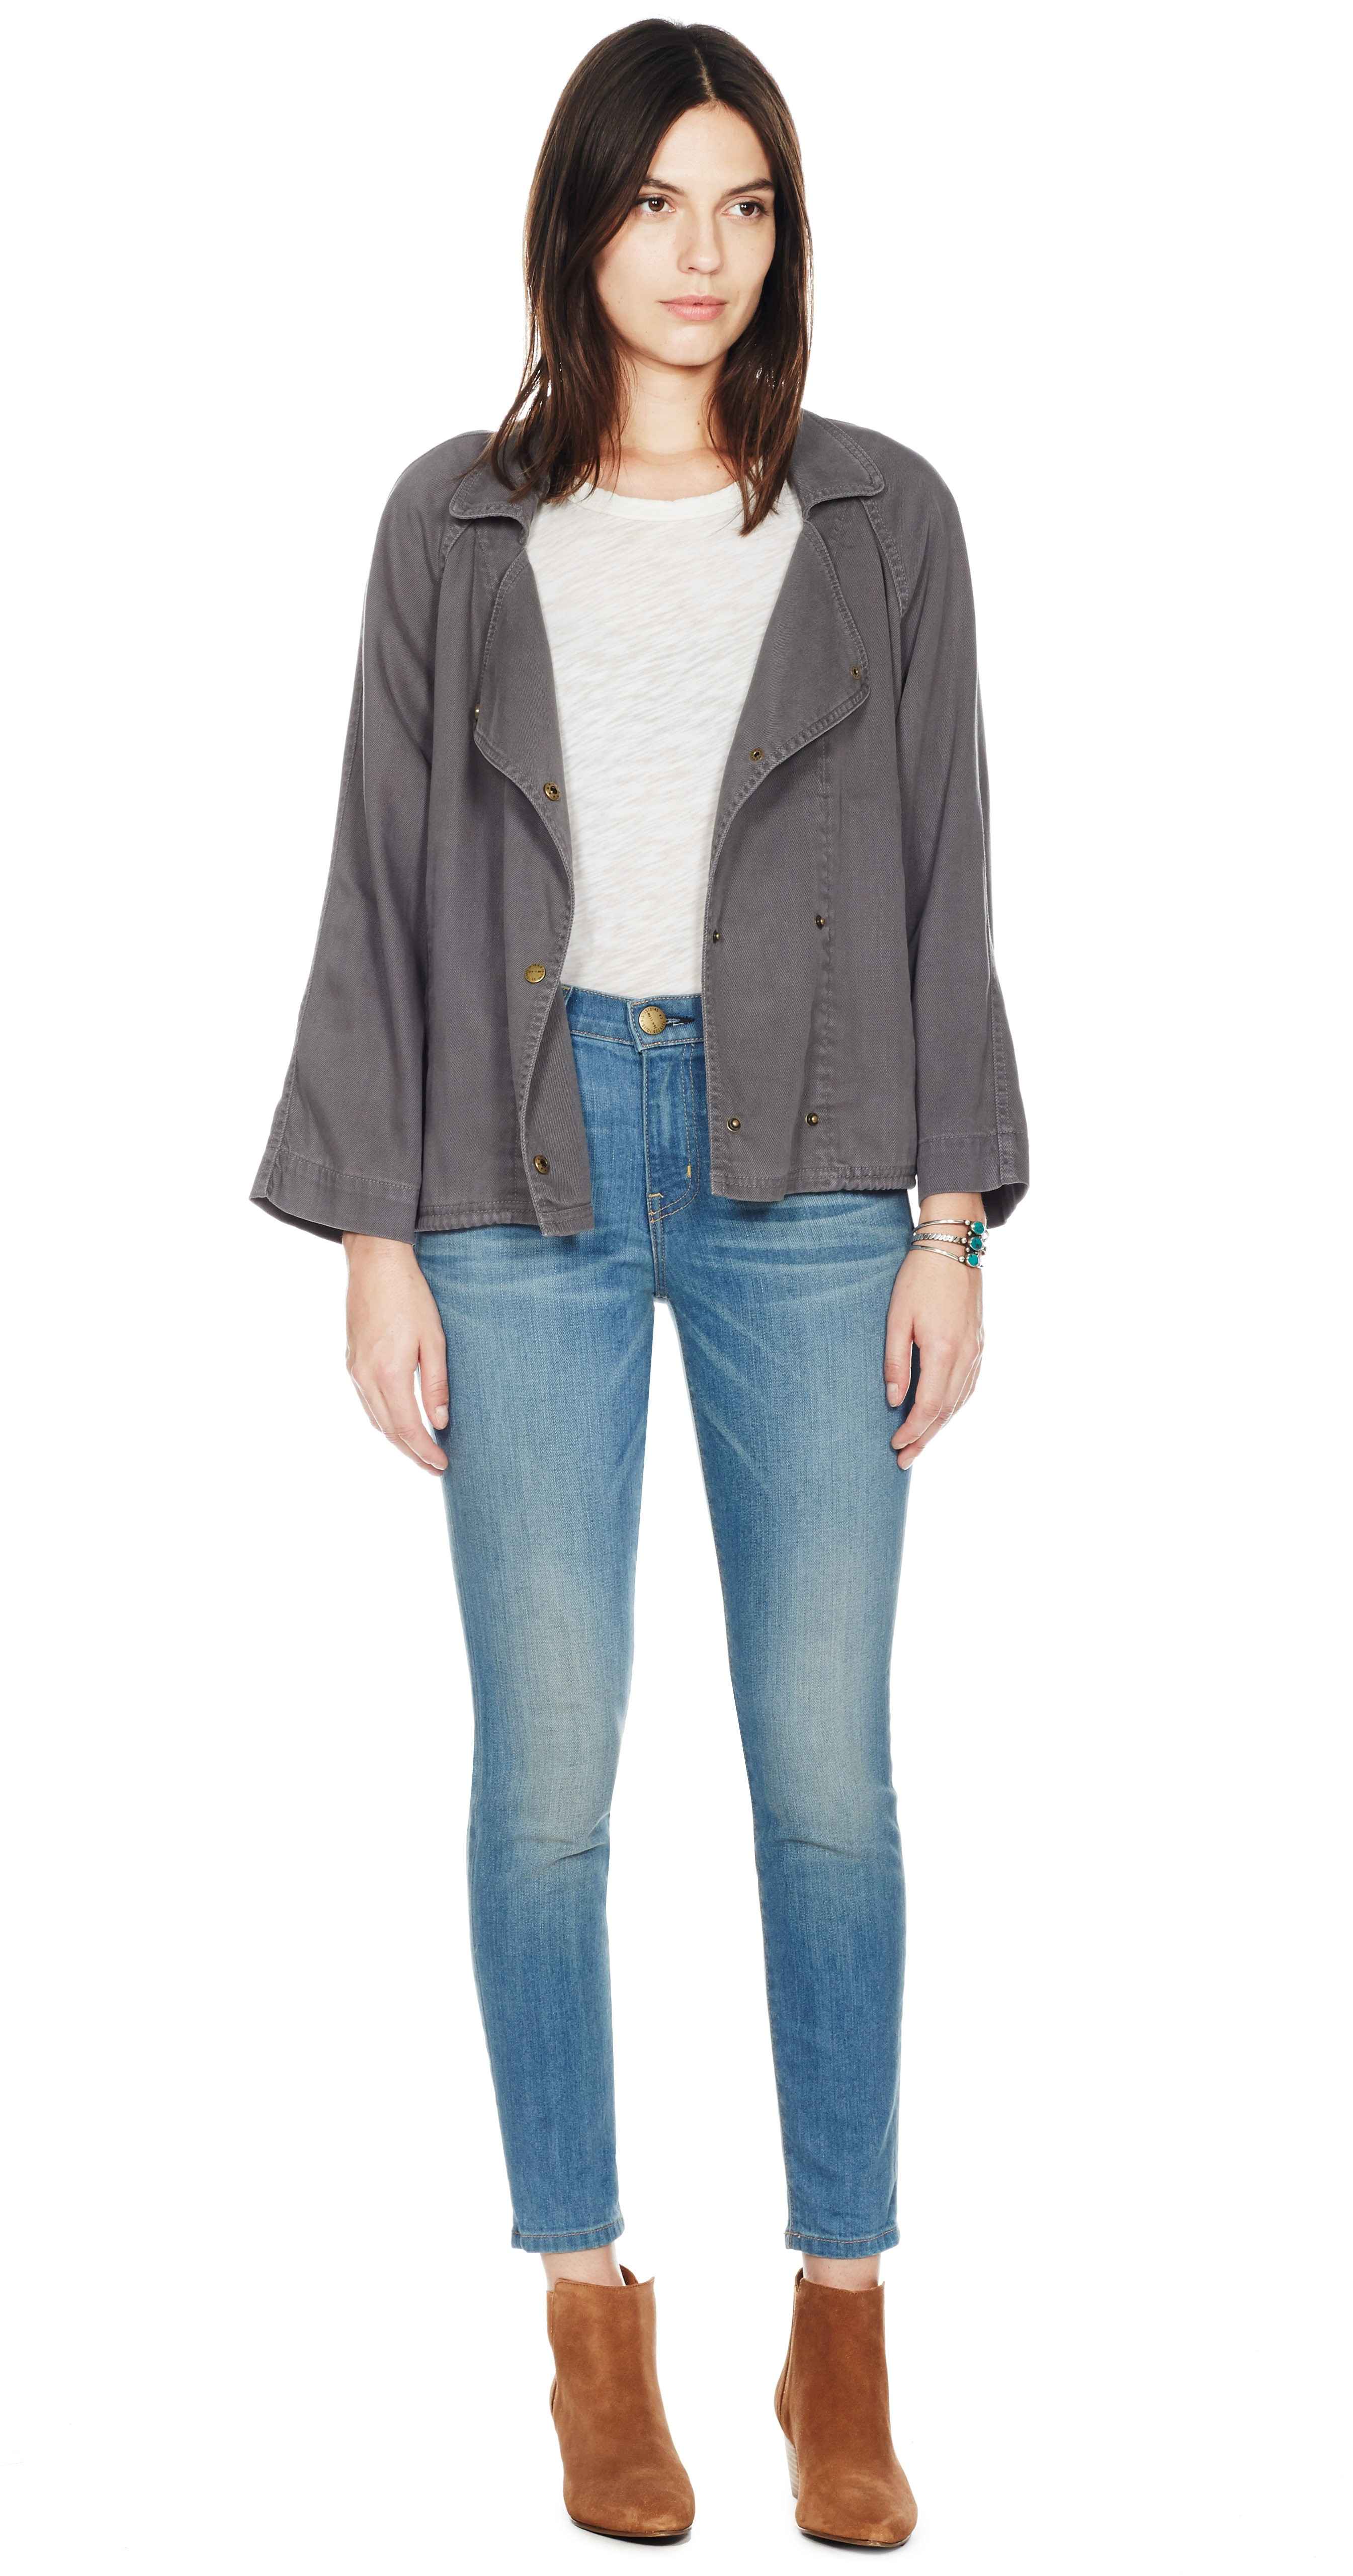 Lyst - Current/Elliott The Conductor Jacket in Gray